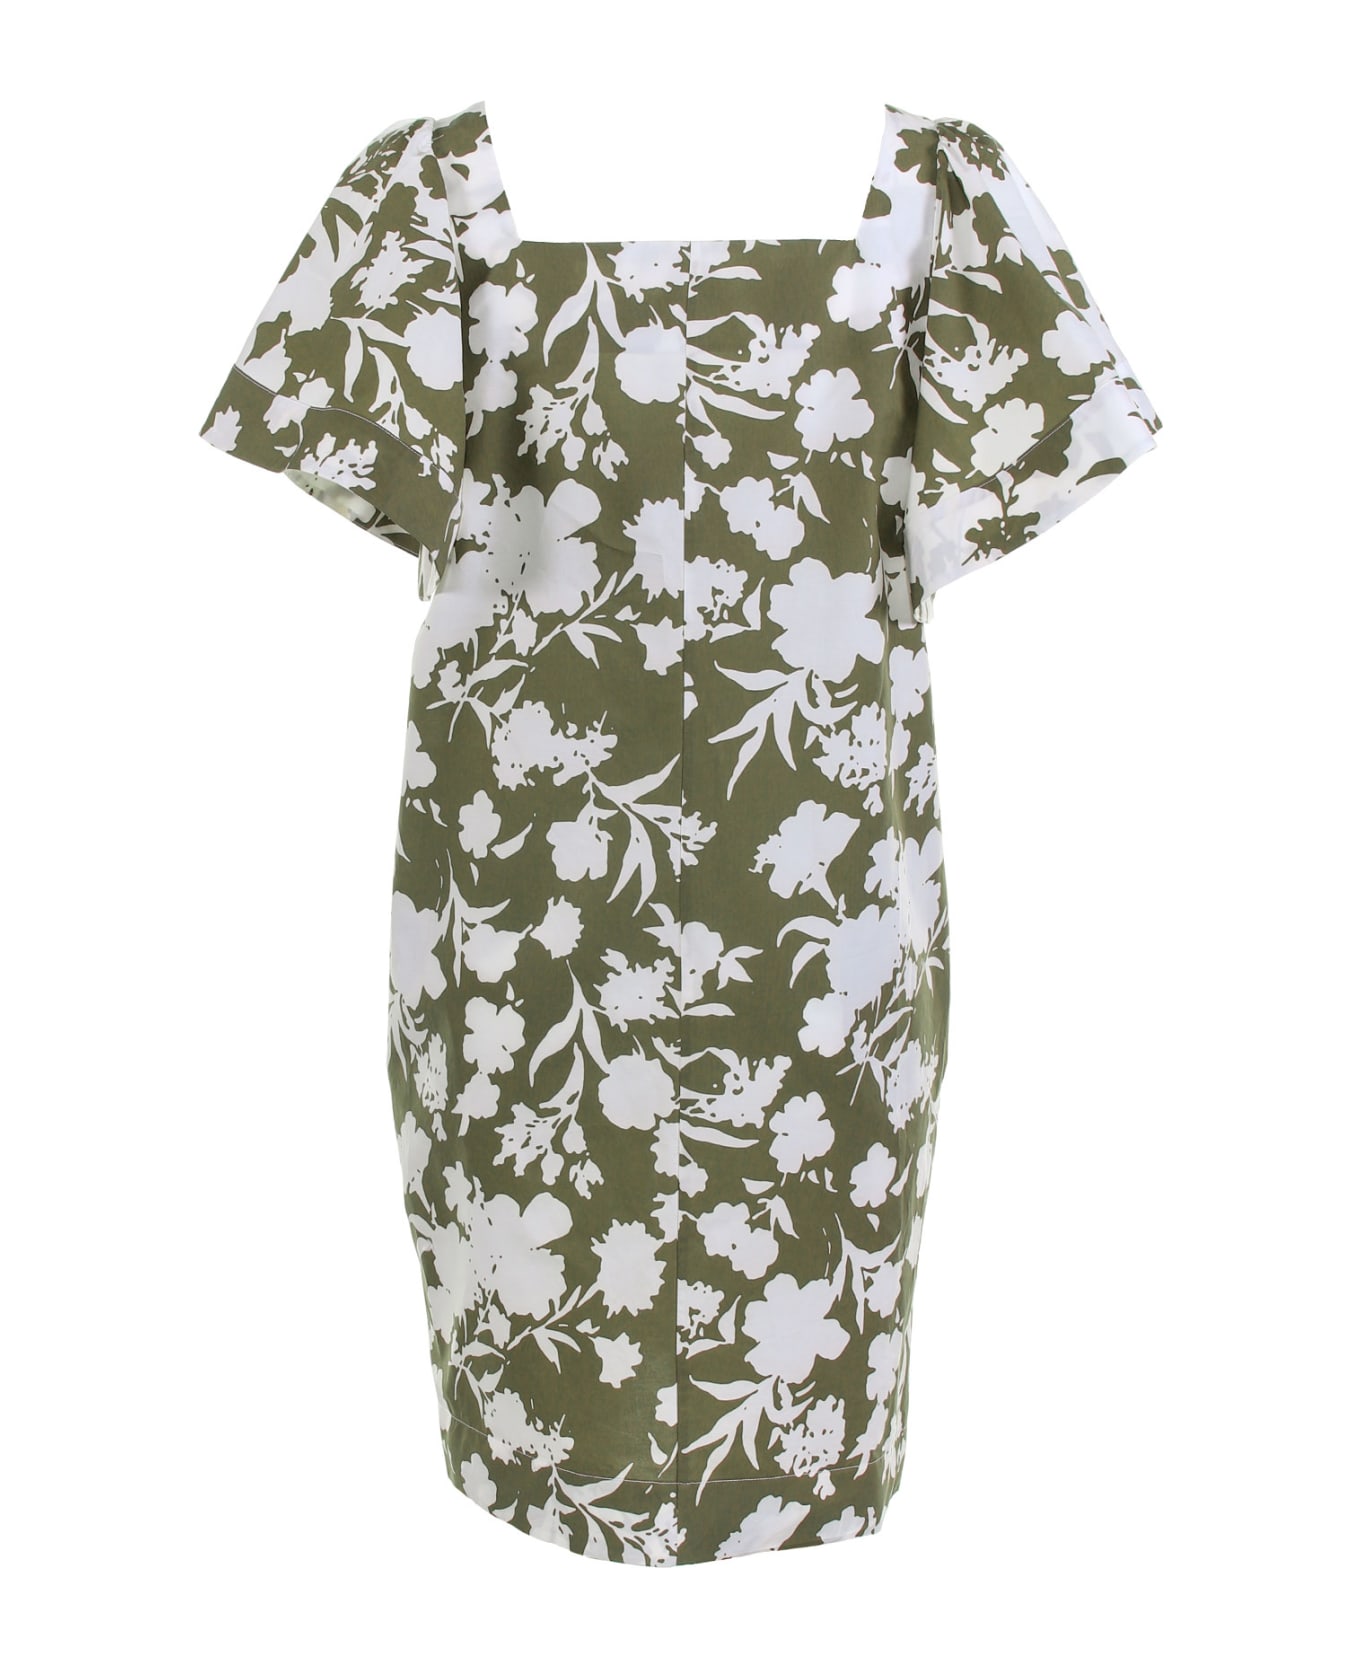 Barba Napoli Dress With Butterfly Sleeve - VERDE MILITARE ワンピース＆ドレス